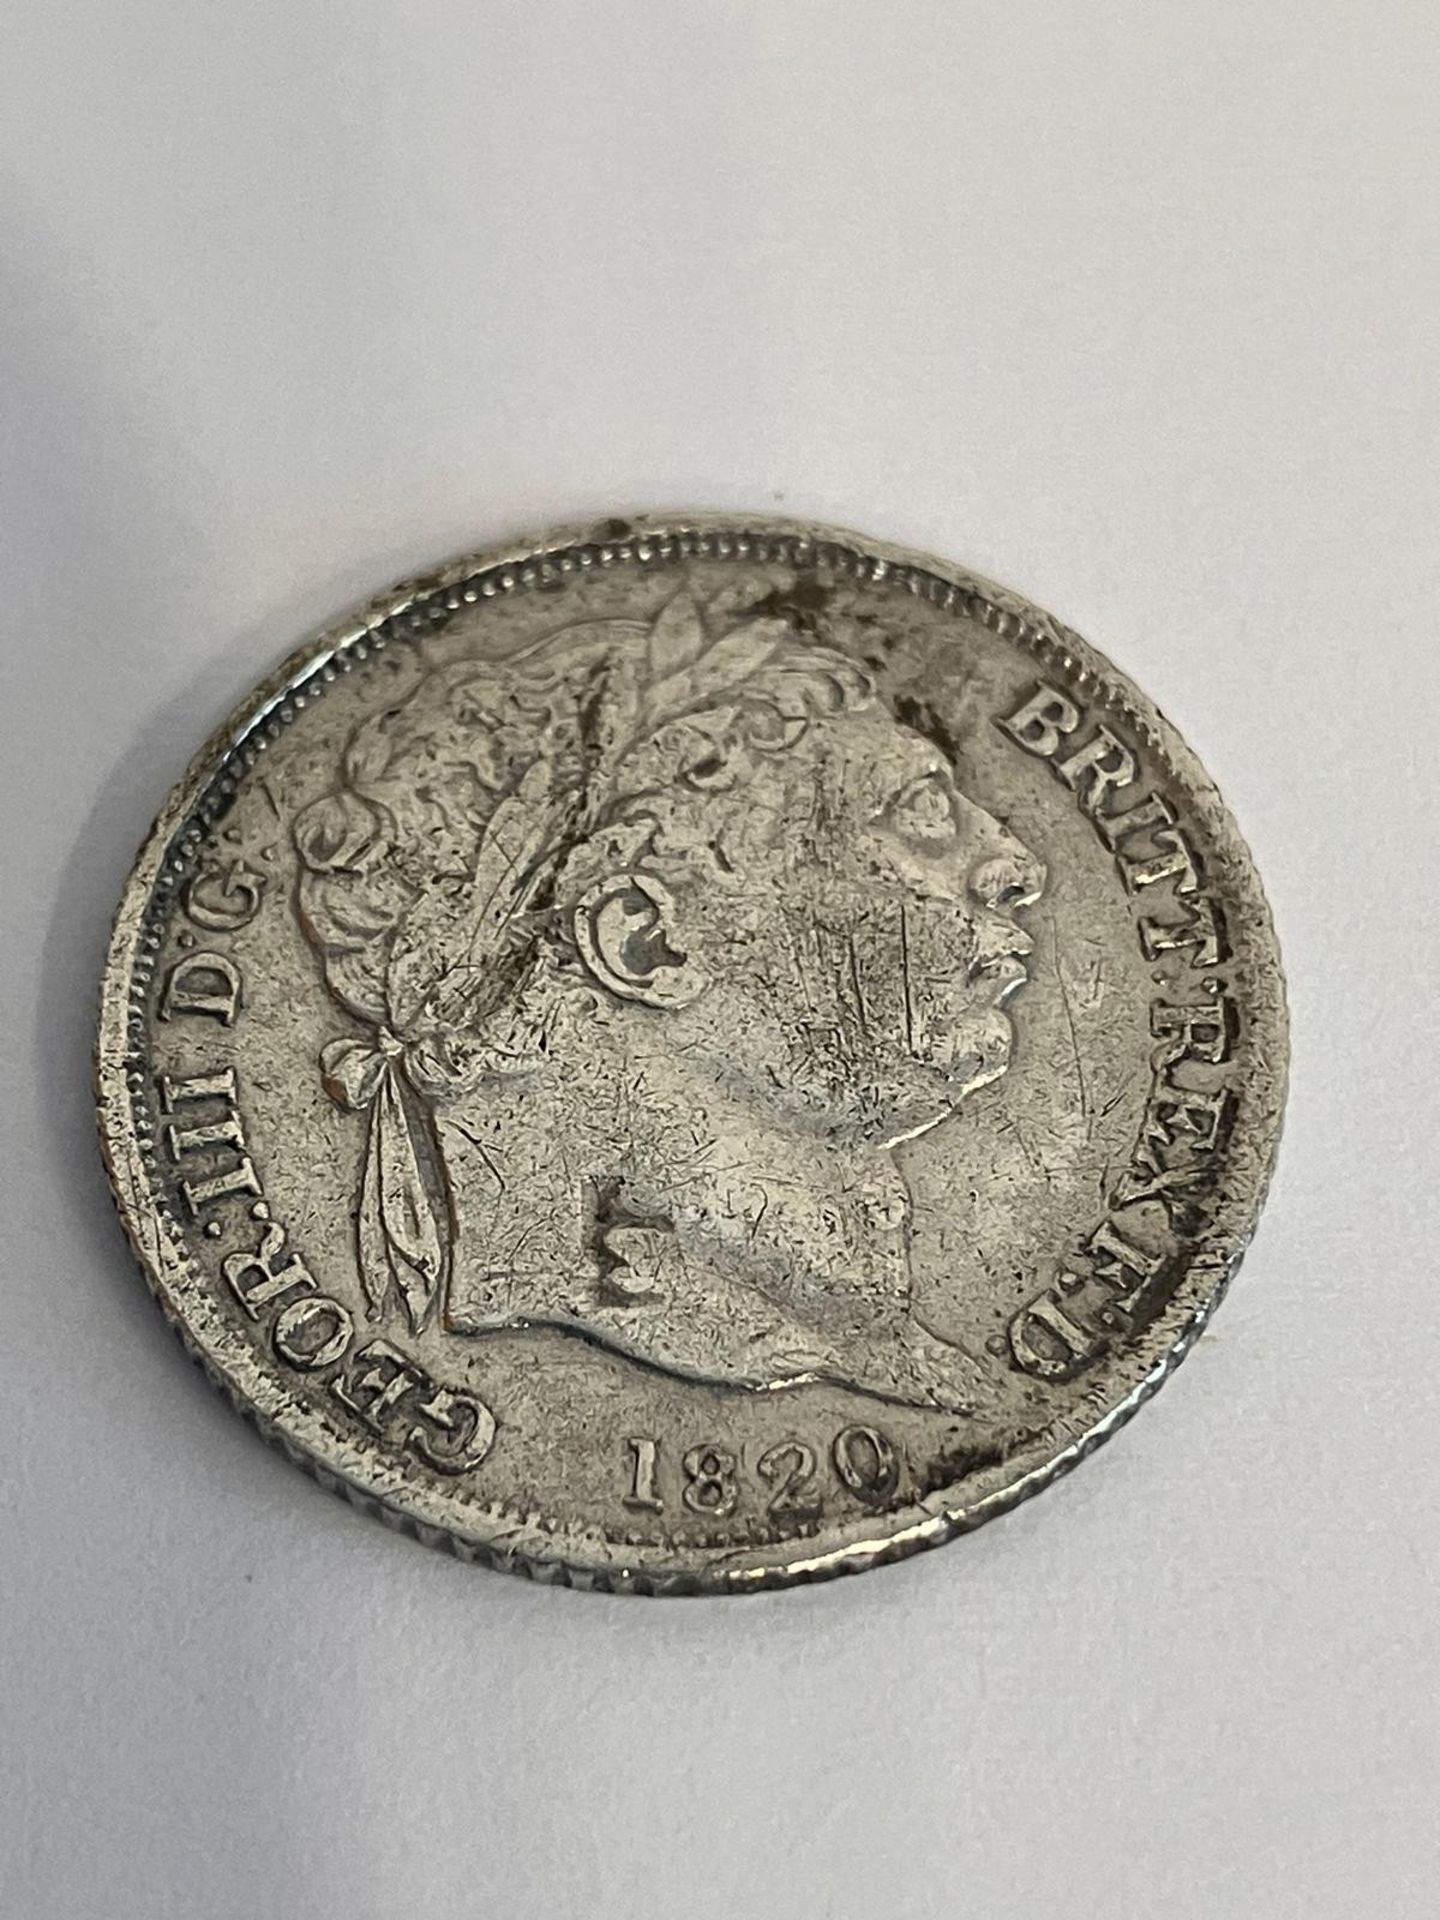 1820 GEORGE III SILVER SIXPENCE.Better grade coin. Extra fine condition. - Bild 2 aus 2